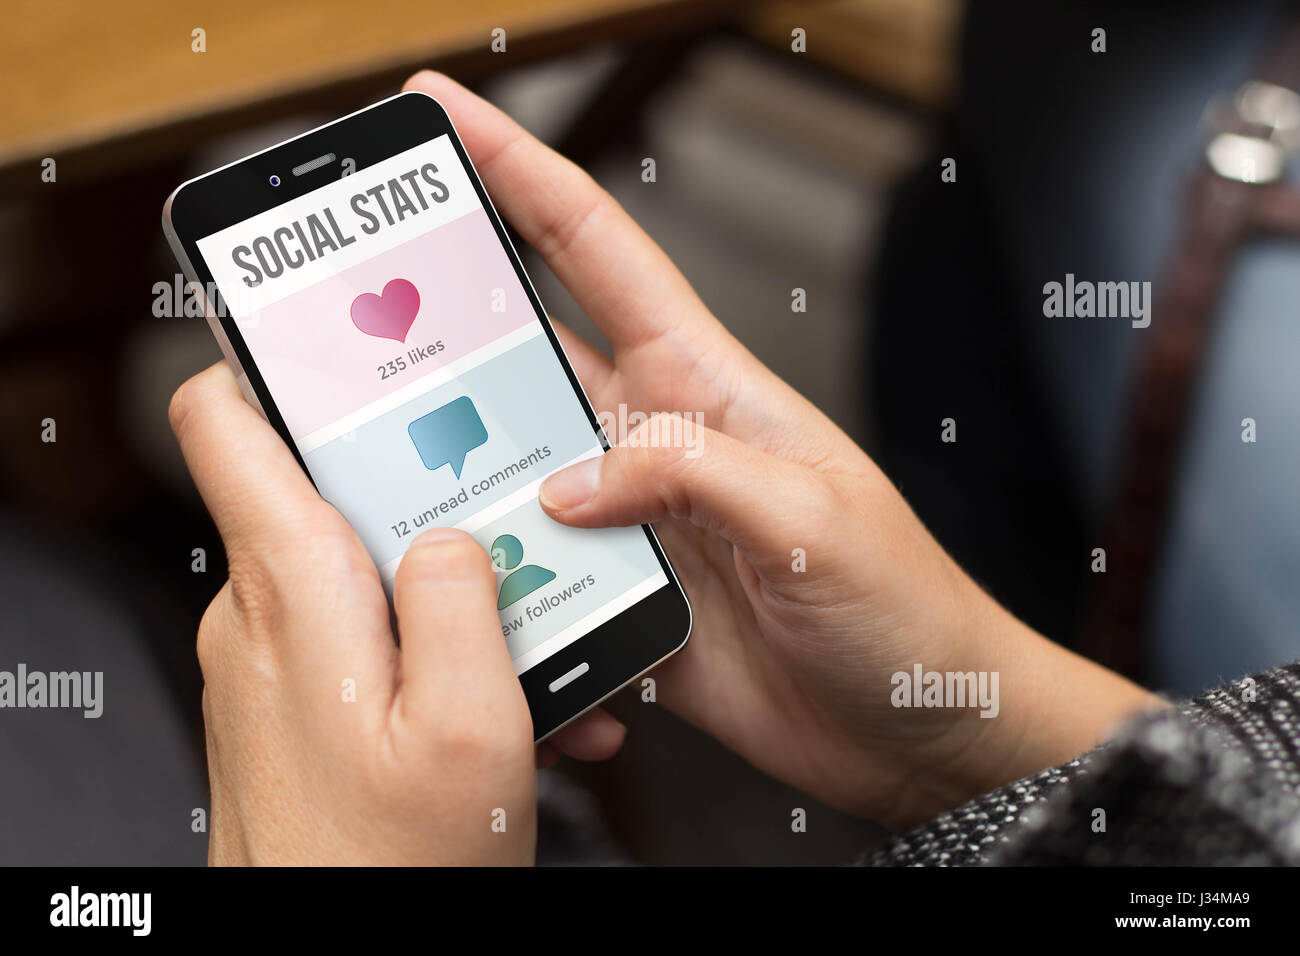 mobile design concept: girl using a digital generated phone with social stats on the screen. All screen graphics are made up. Stock Photo